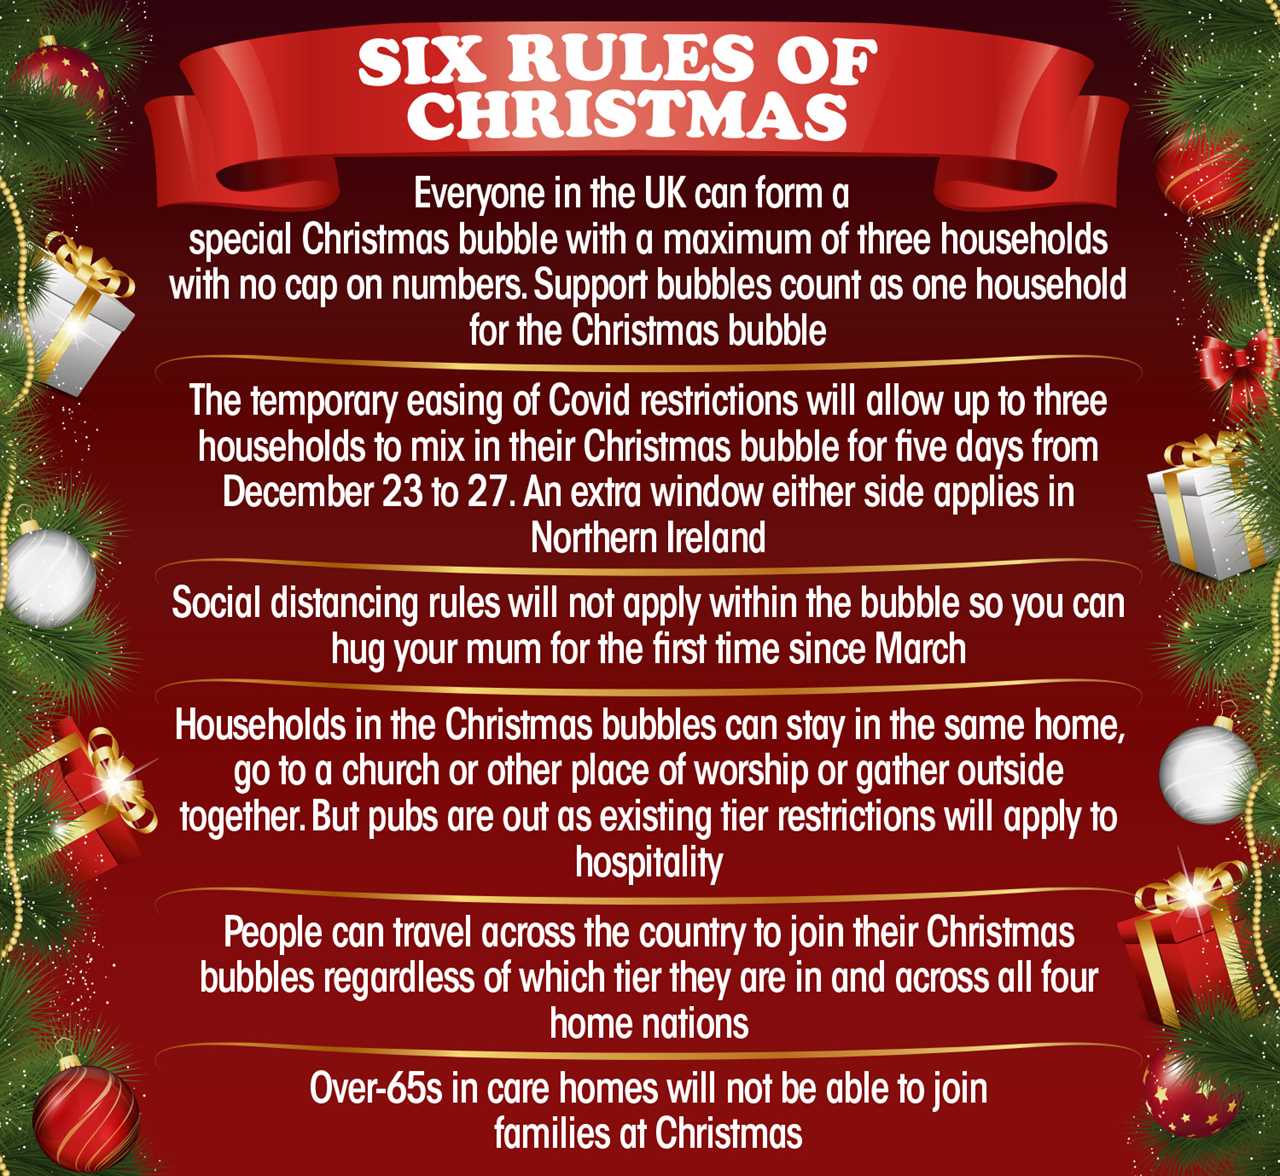 What are the rules for travelling between Tiers at Christmas?